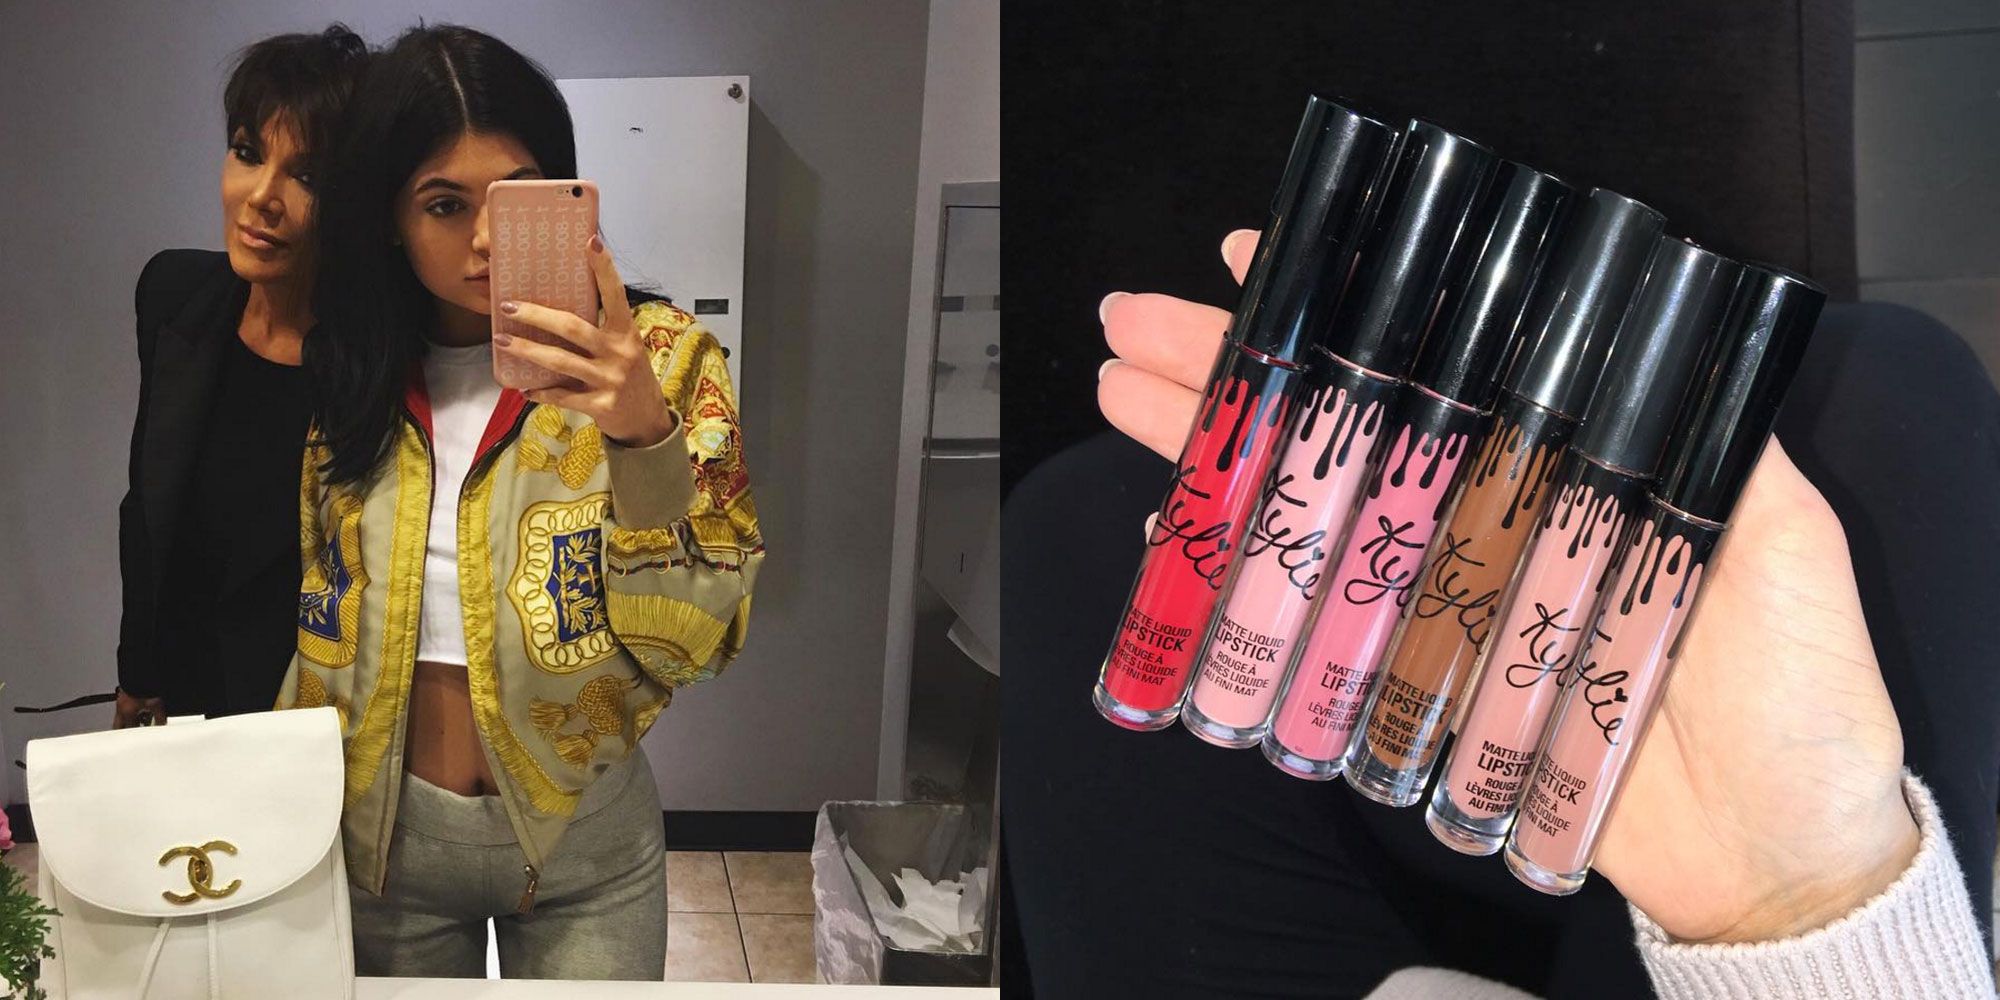 Kylie Jenner Lip Kits Sell Out in 10 Minutes - Kylie Jenner